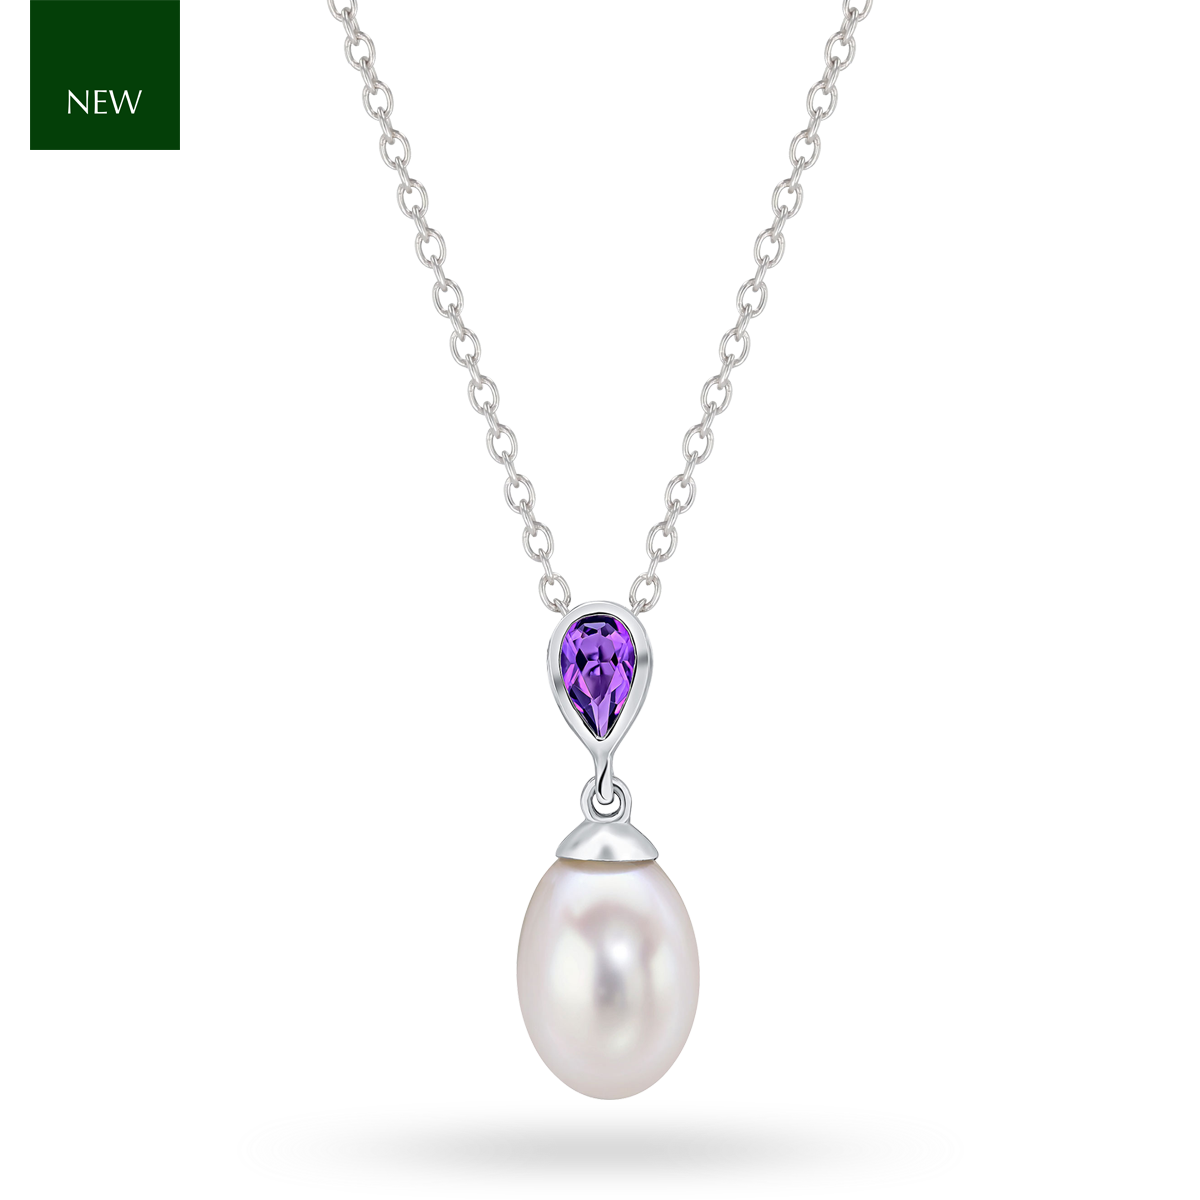 9ct White Gold Pearl and Amethyst Drop Pendant & Chain